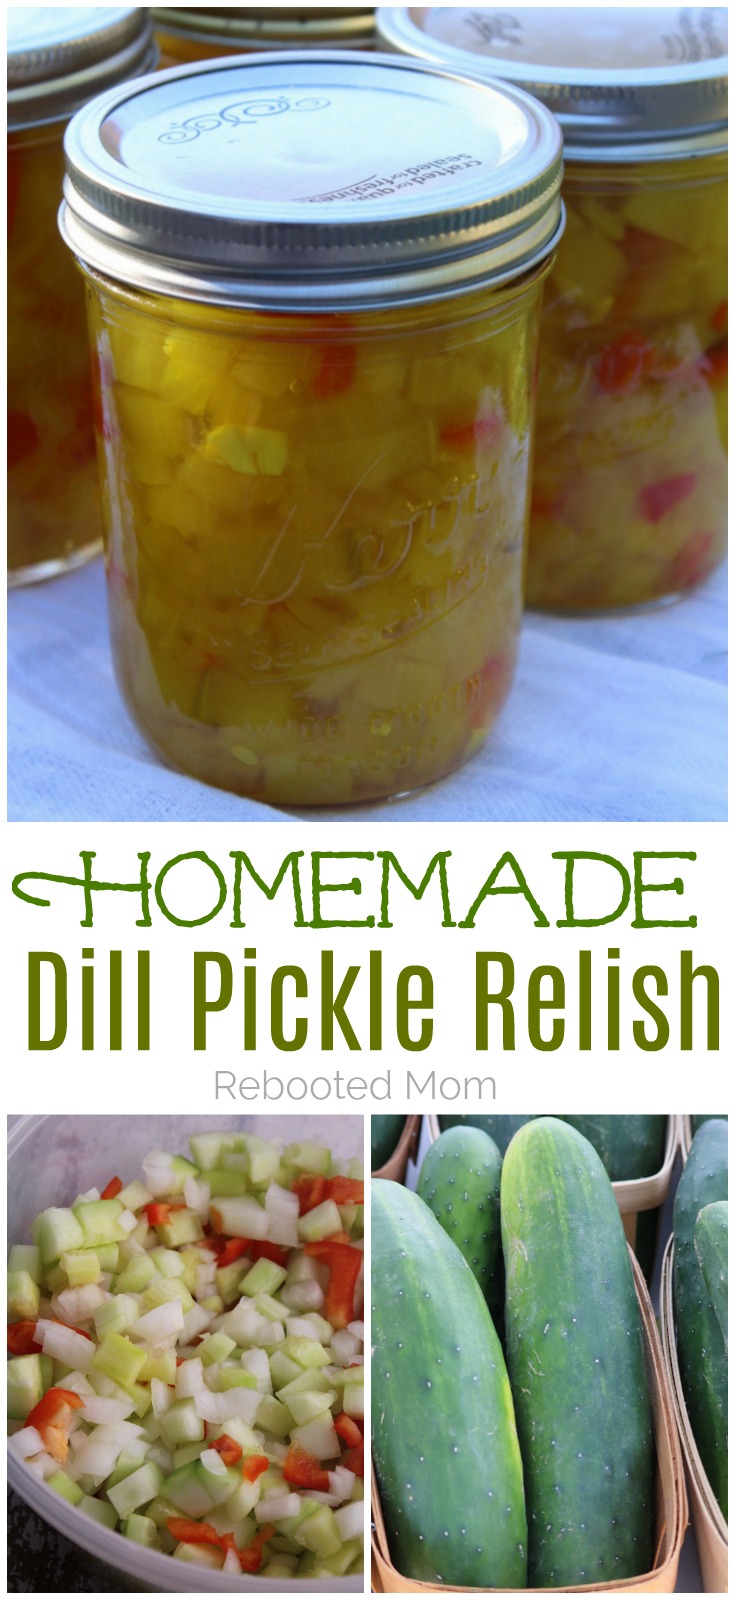 Enjoy this delicious homemade dill pickle relish alongside baked potatoes, potato salad, on your sandwich, or topped on a freshly grilled hamburger! #dill #relish #cucumbers